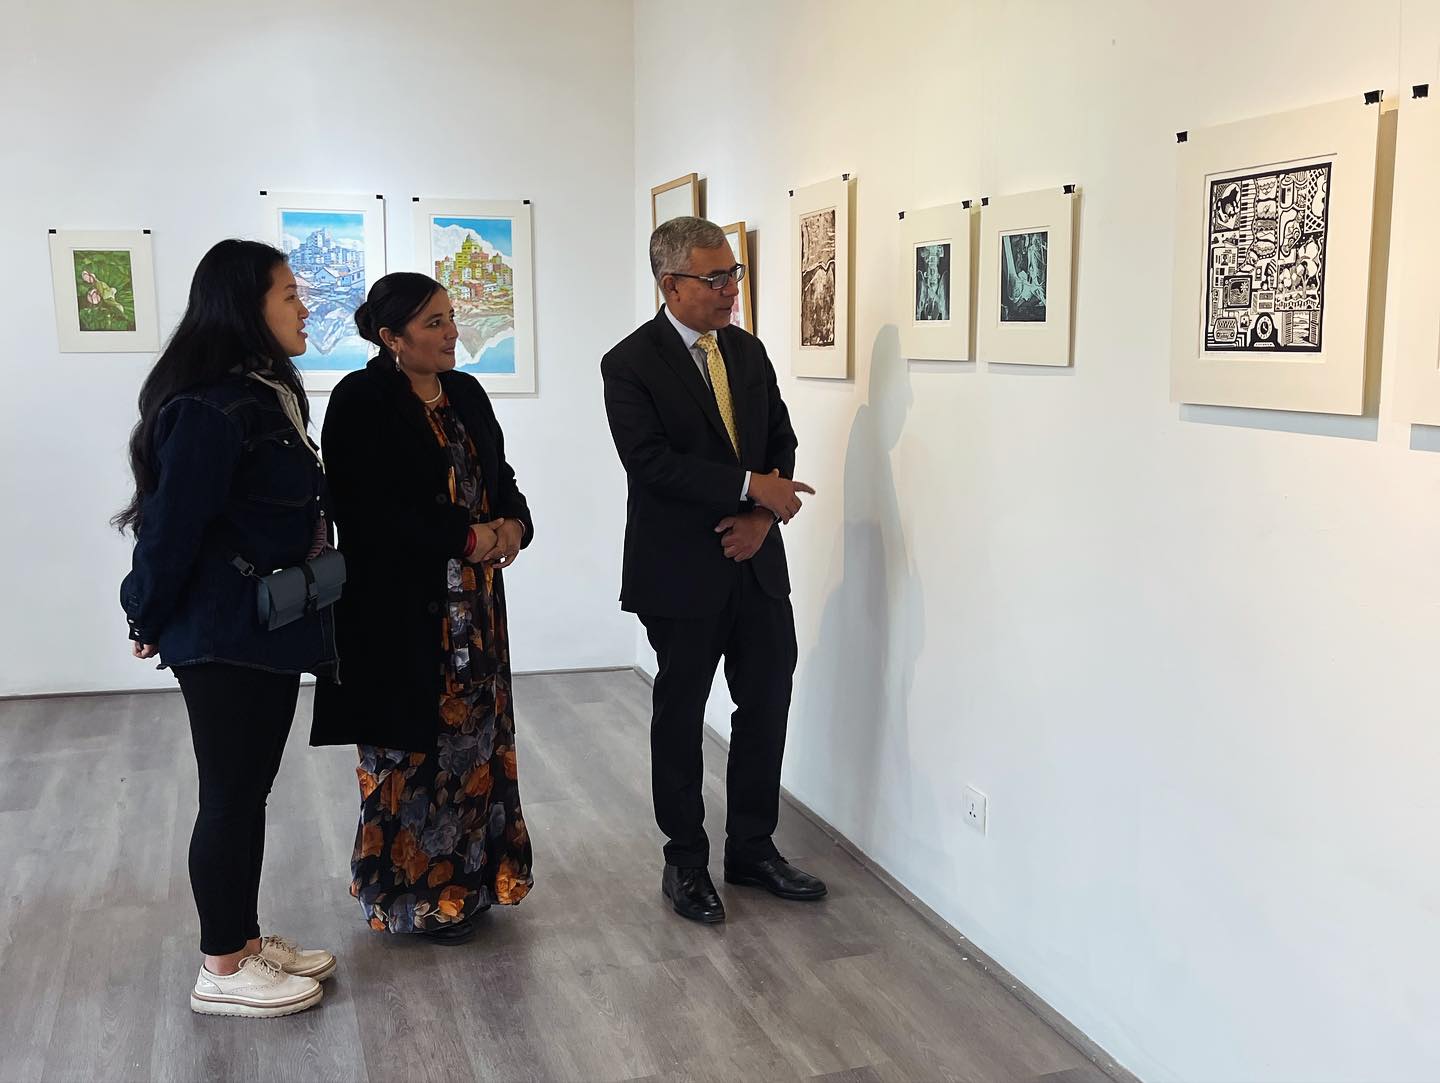 ‘Lines of Relationship’ on display at Mcube Gallery